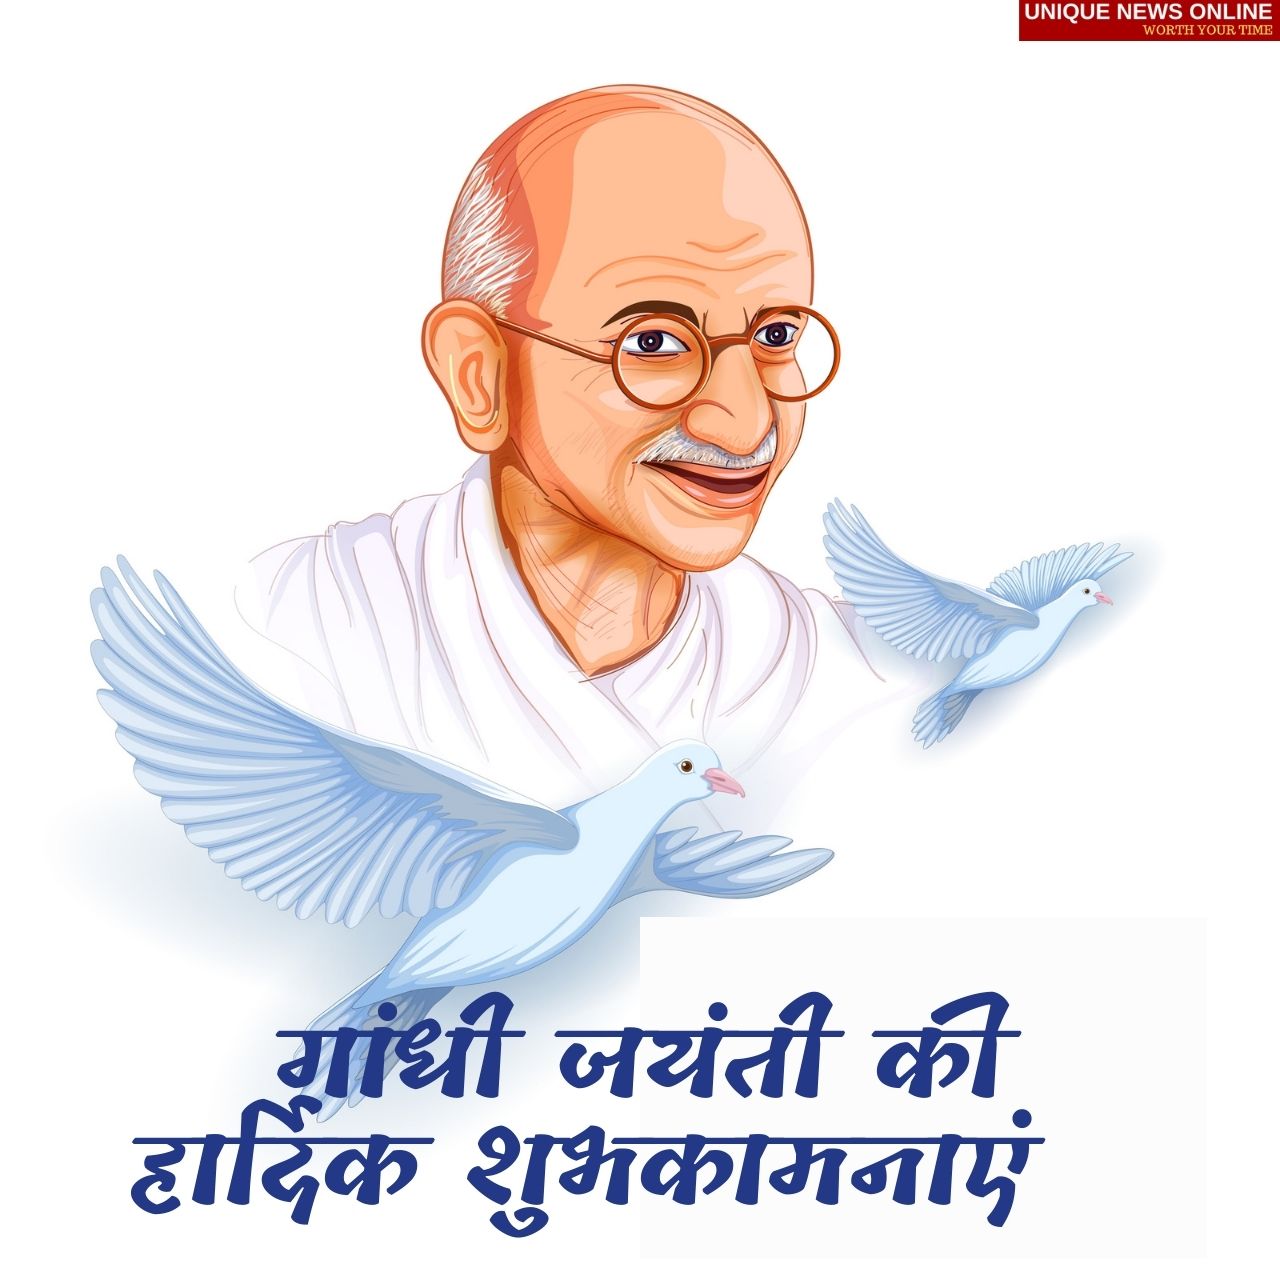 Gandhi Jayanti 2021 Hindi Wishes Quotes Messages Wishes Greetings And Hd Images To Share 9346